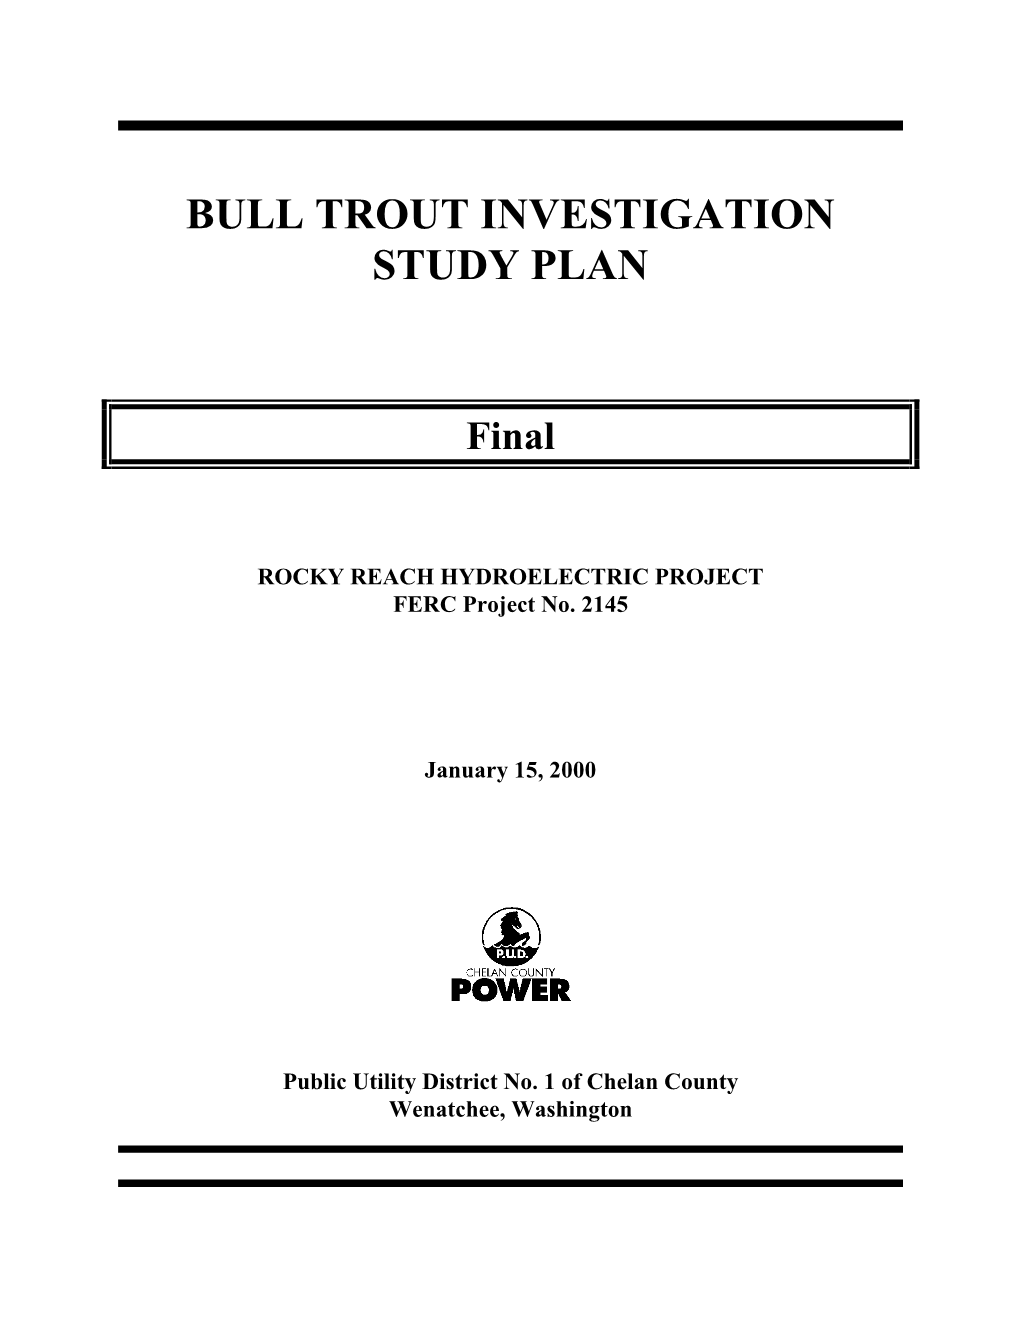 Bull Trout Investigation Study Plan